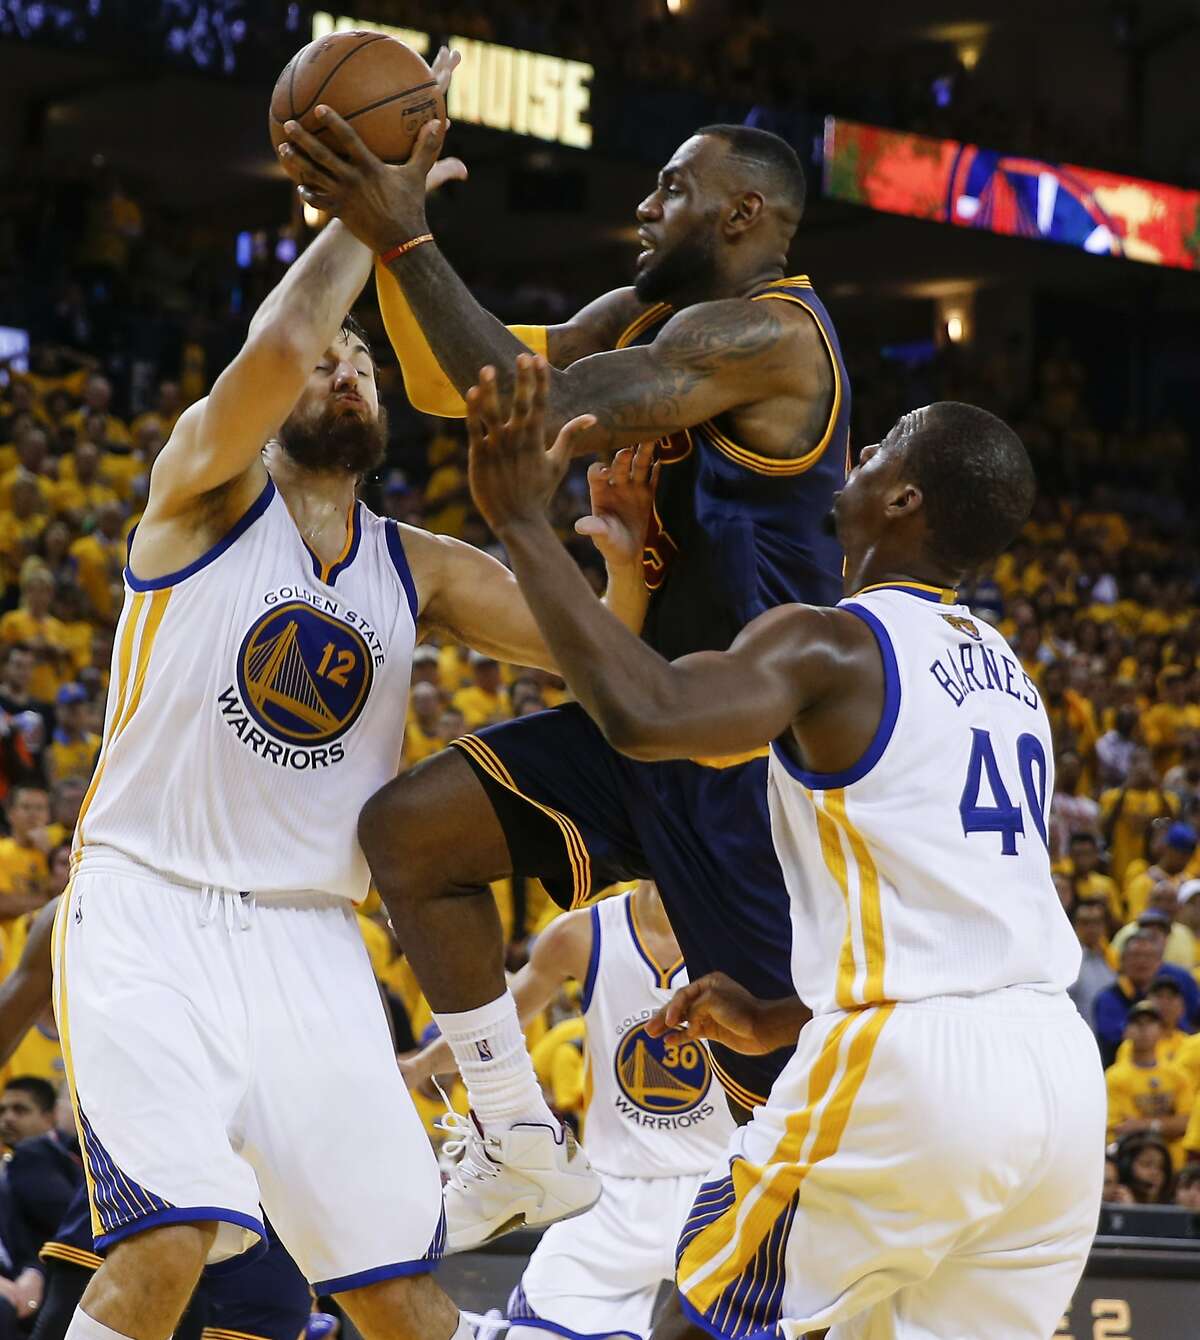 Cleveland Cavaliers' LeBron James tries to shoot between Golden State Warriors' Andrew Bogut and Harrison Barnes in the third period during Game 1 of The NBA Finals on Thursday, June 4, 2015 in Oakland, Calif.